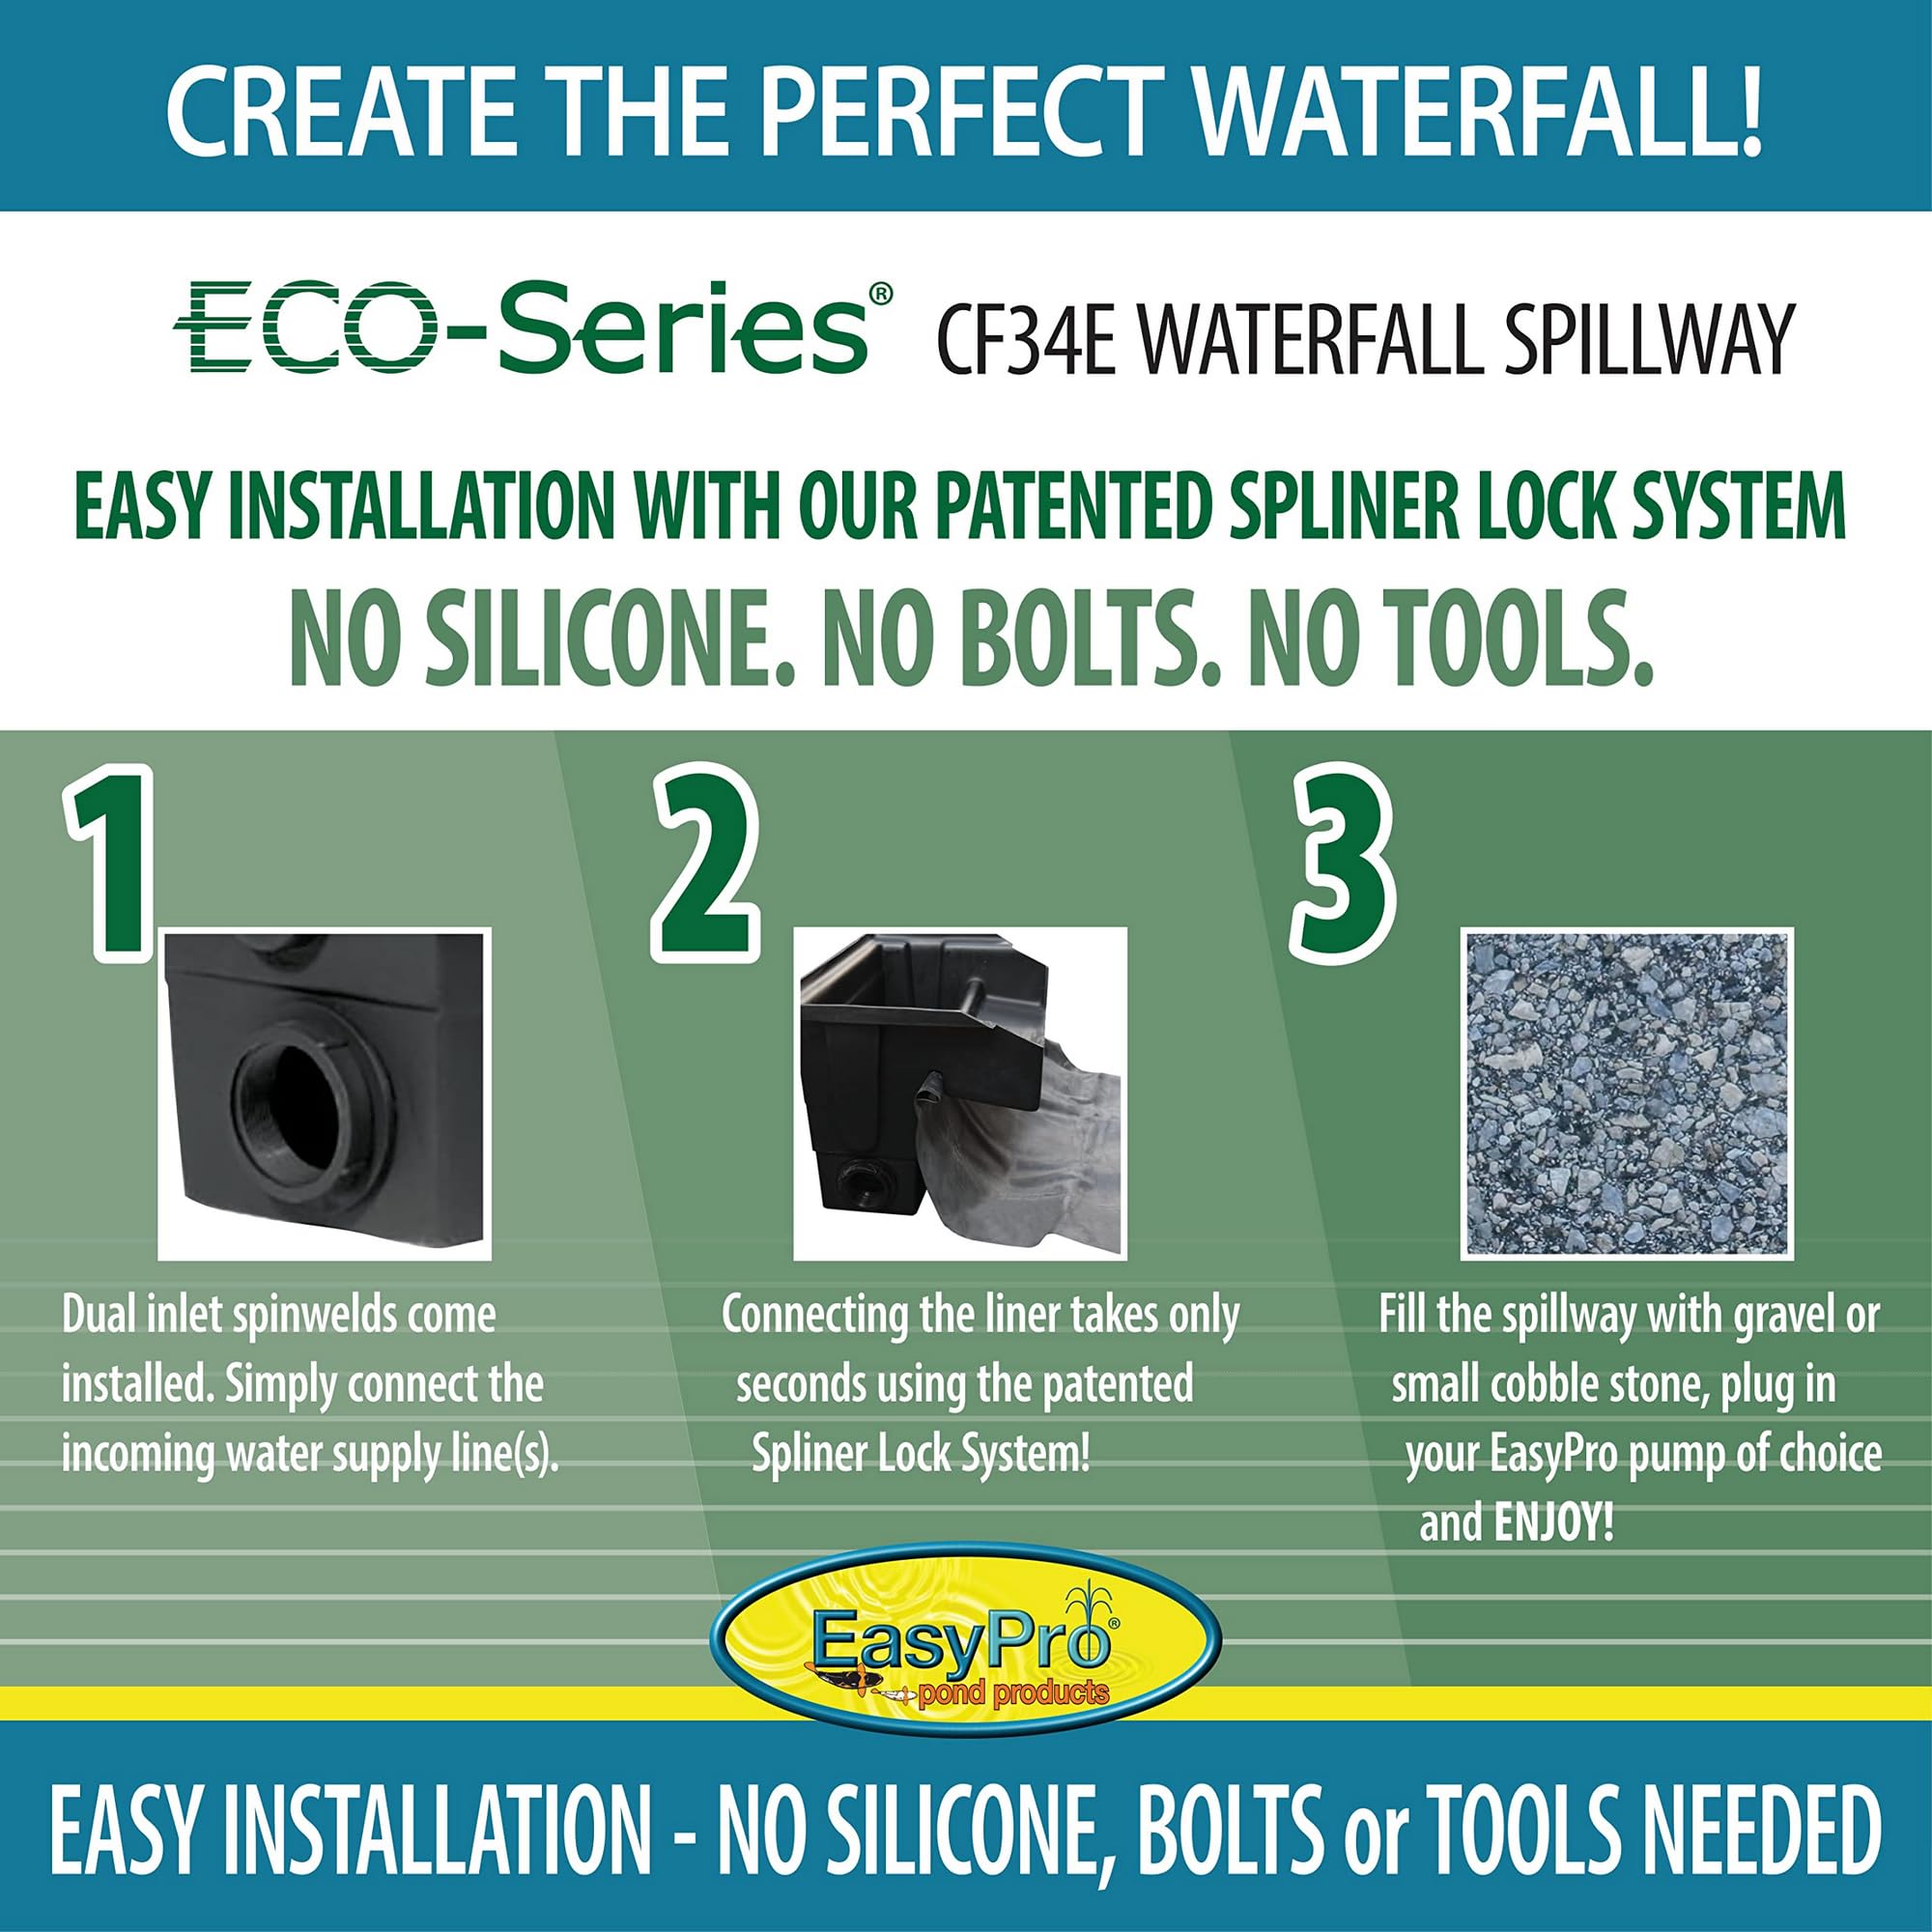 EasyPro Pond Products CF34E Eco-Series 34” Waterfall Spillway is Ideal for Just-A-Falls Water Features. Connect Liner Without Tools. 2-2” Installed Spinweld Inlets. Up to 6400 to 8500 GPH Flow